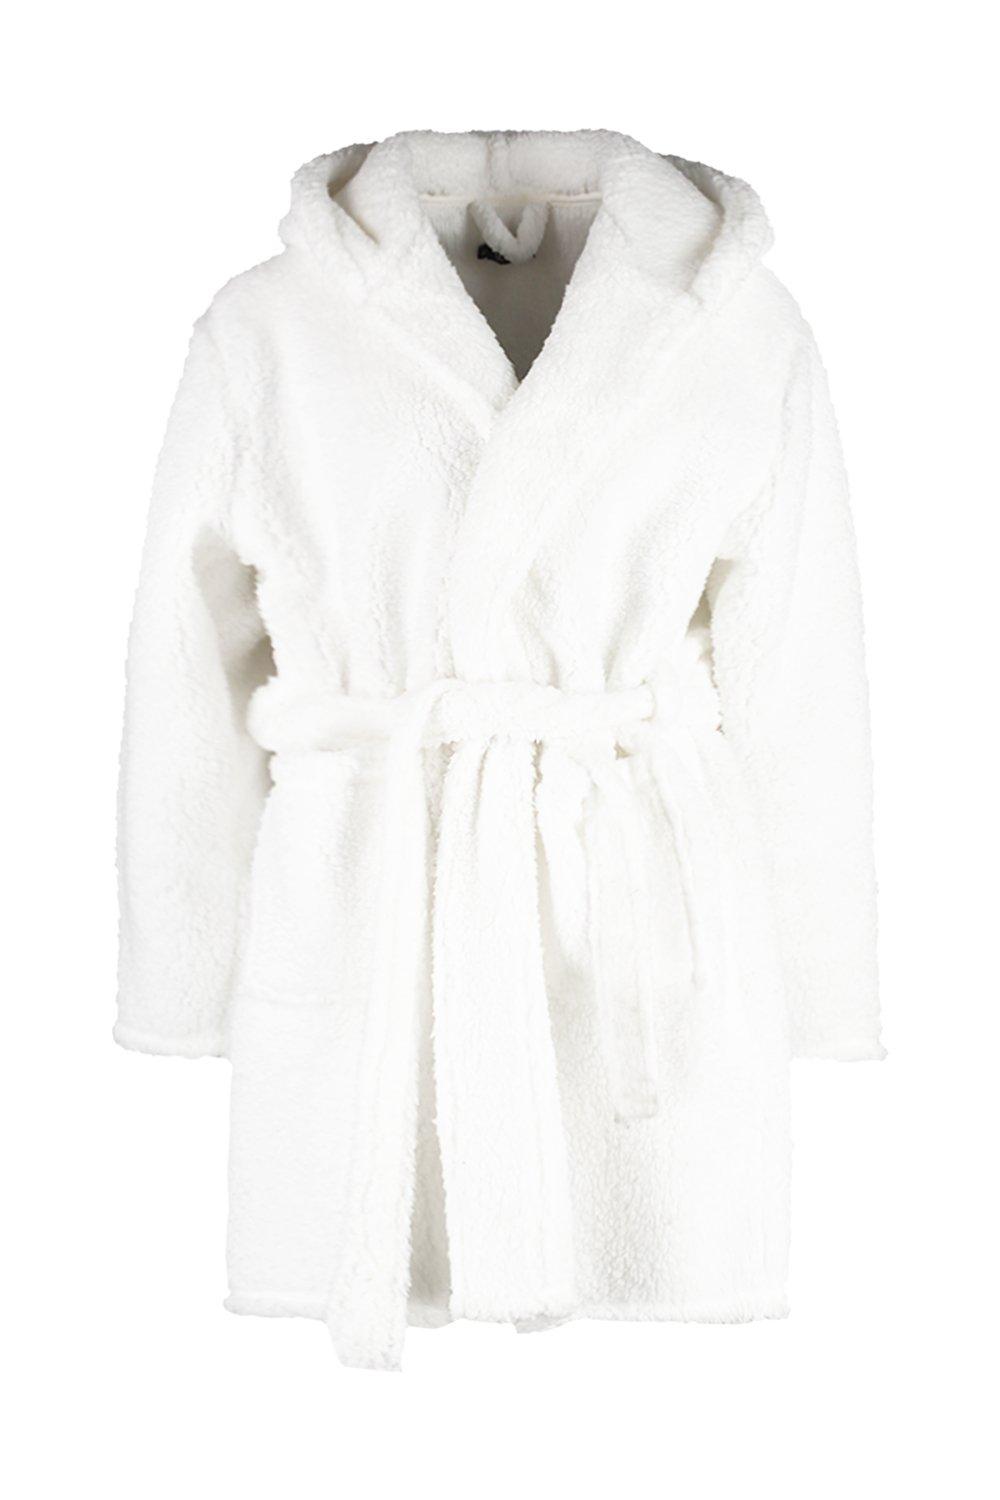 white fluffy dressing gown